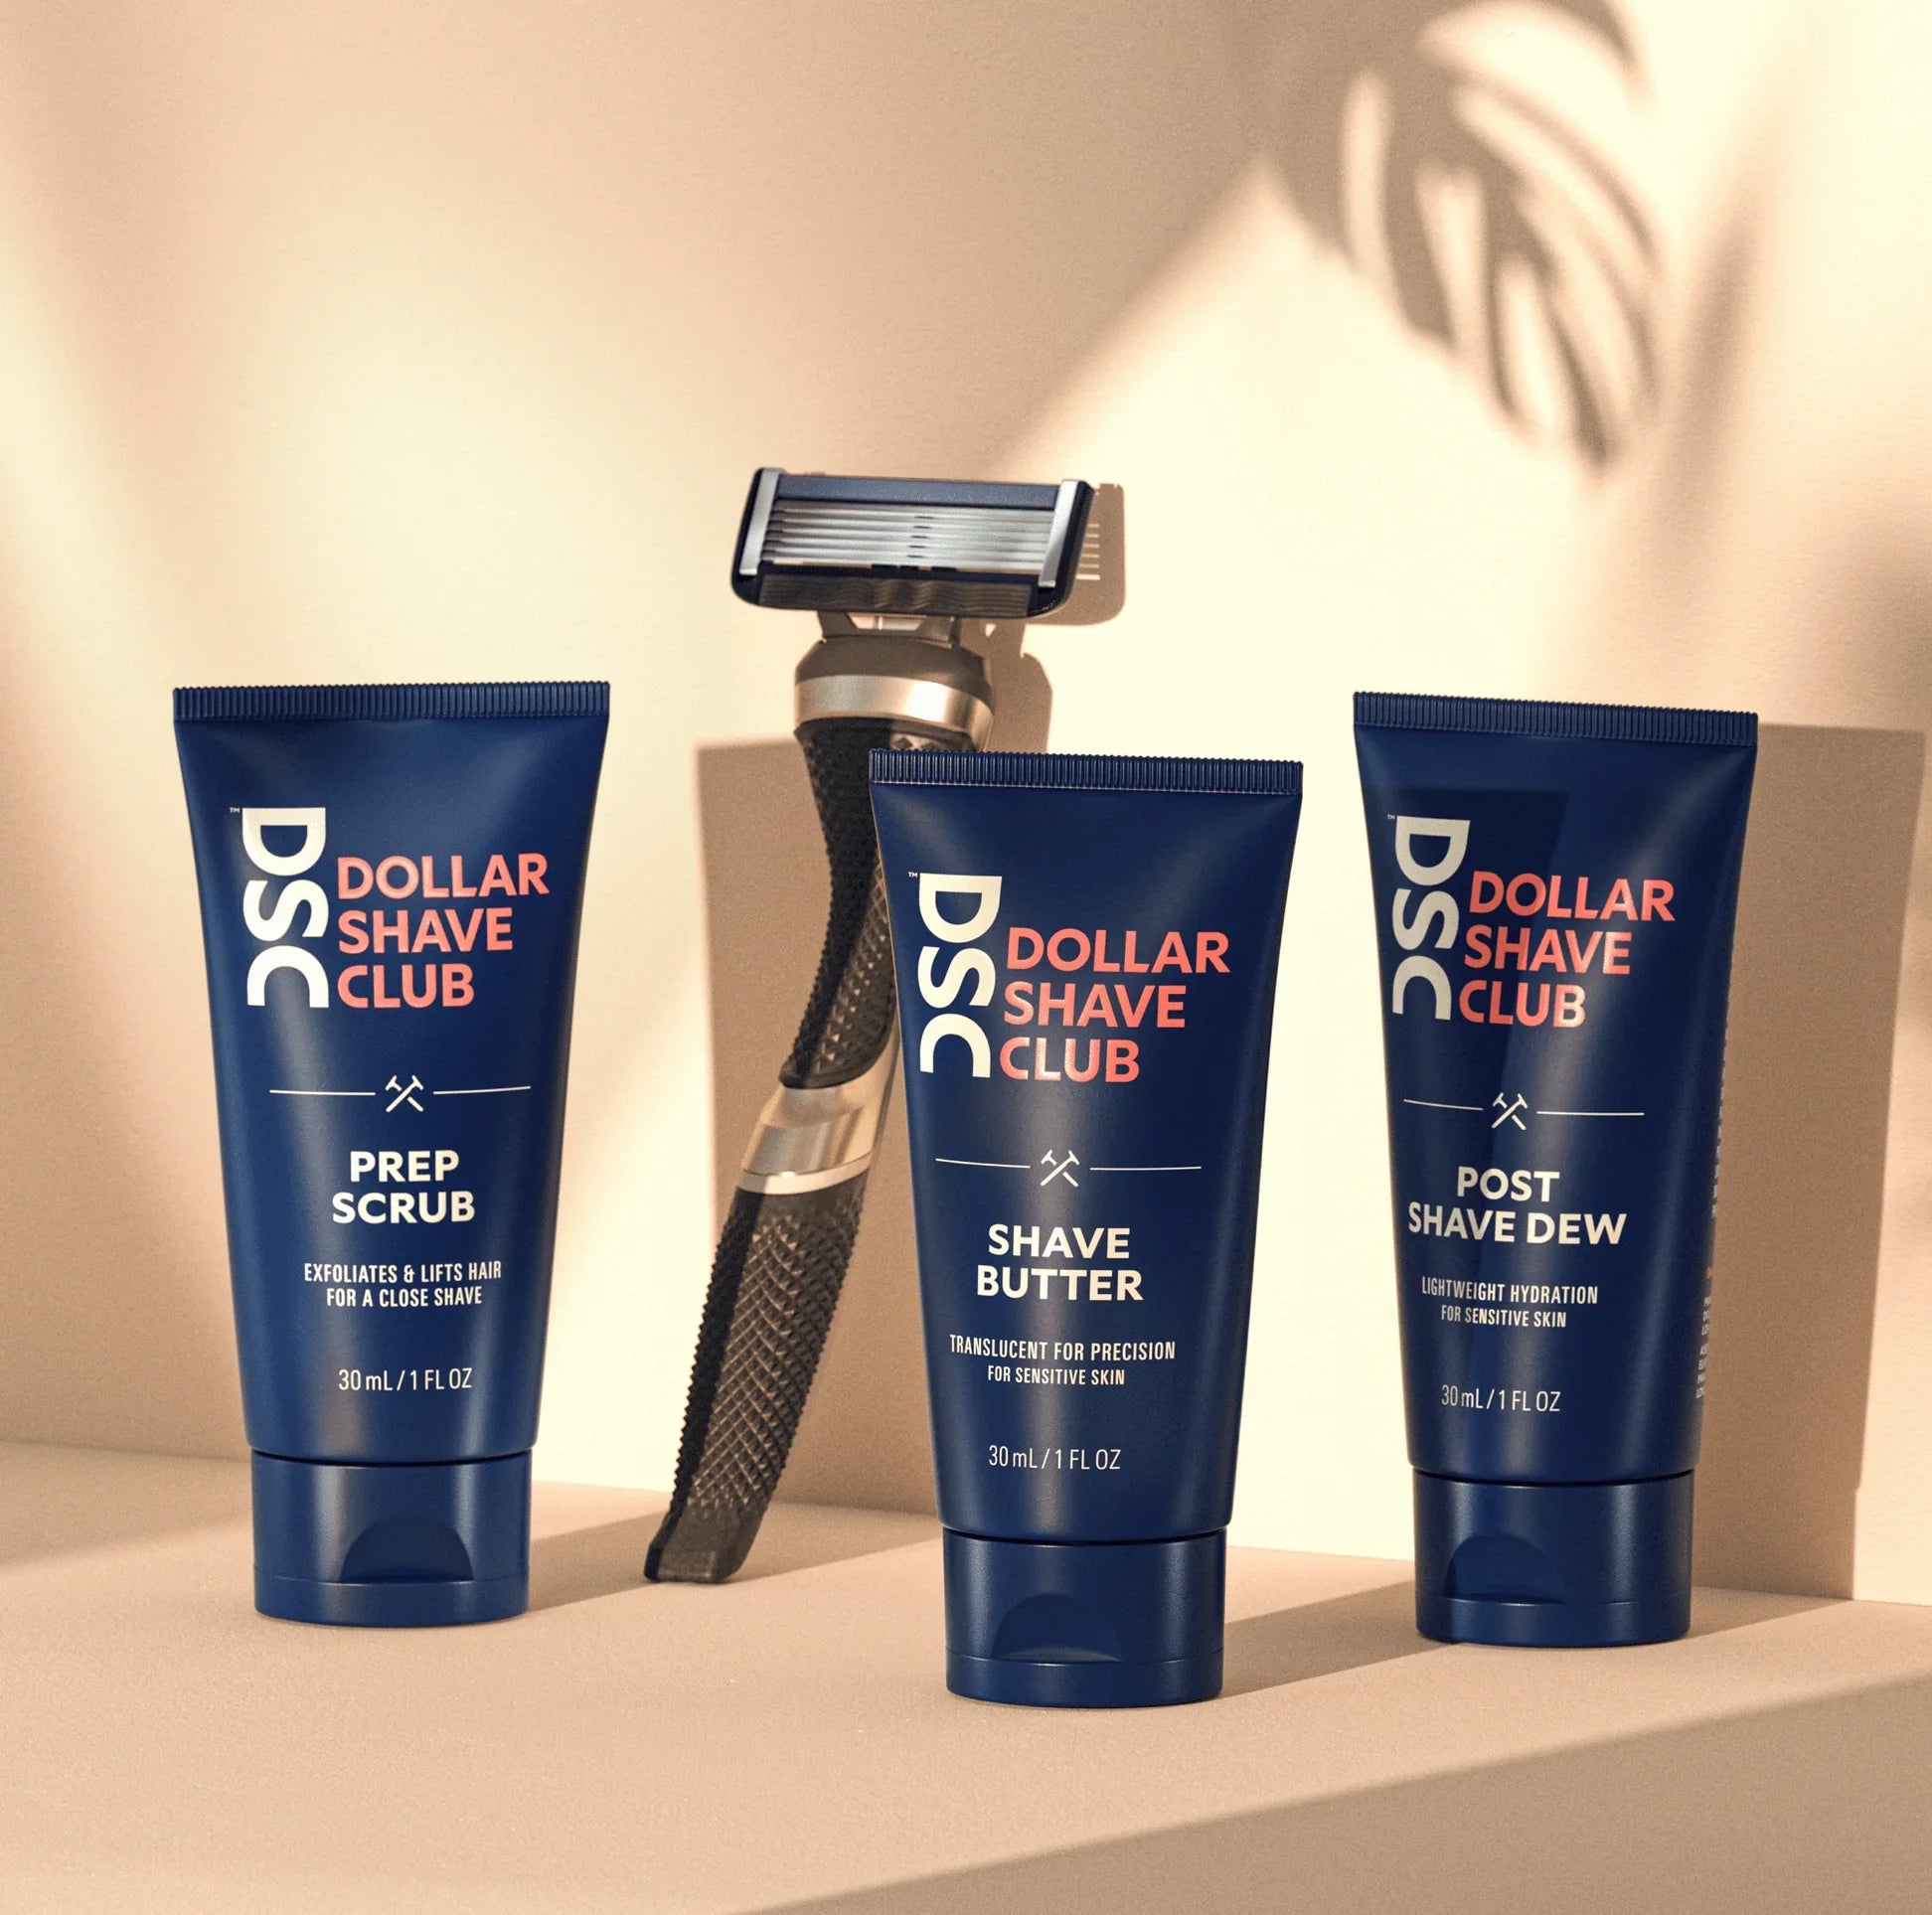 Image of Ultimate Shave Trial Kit against tan background.